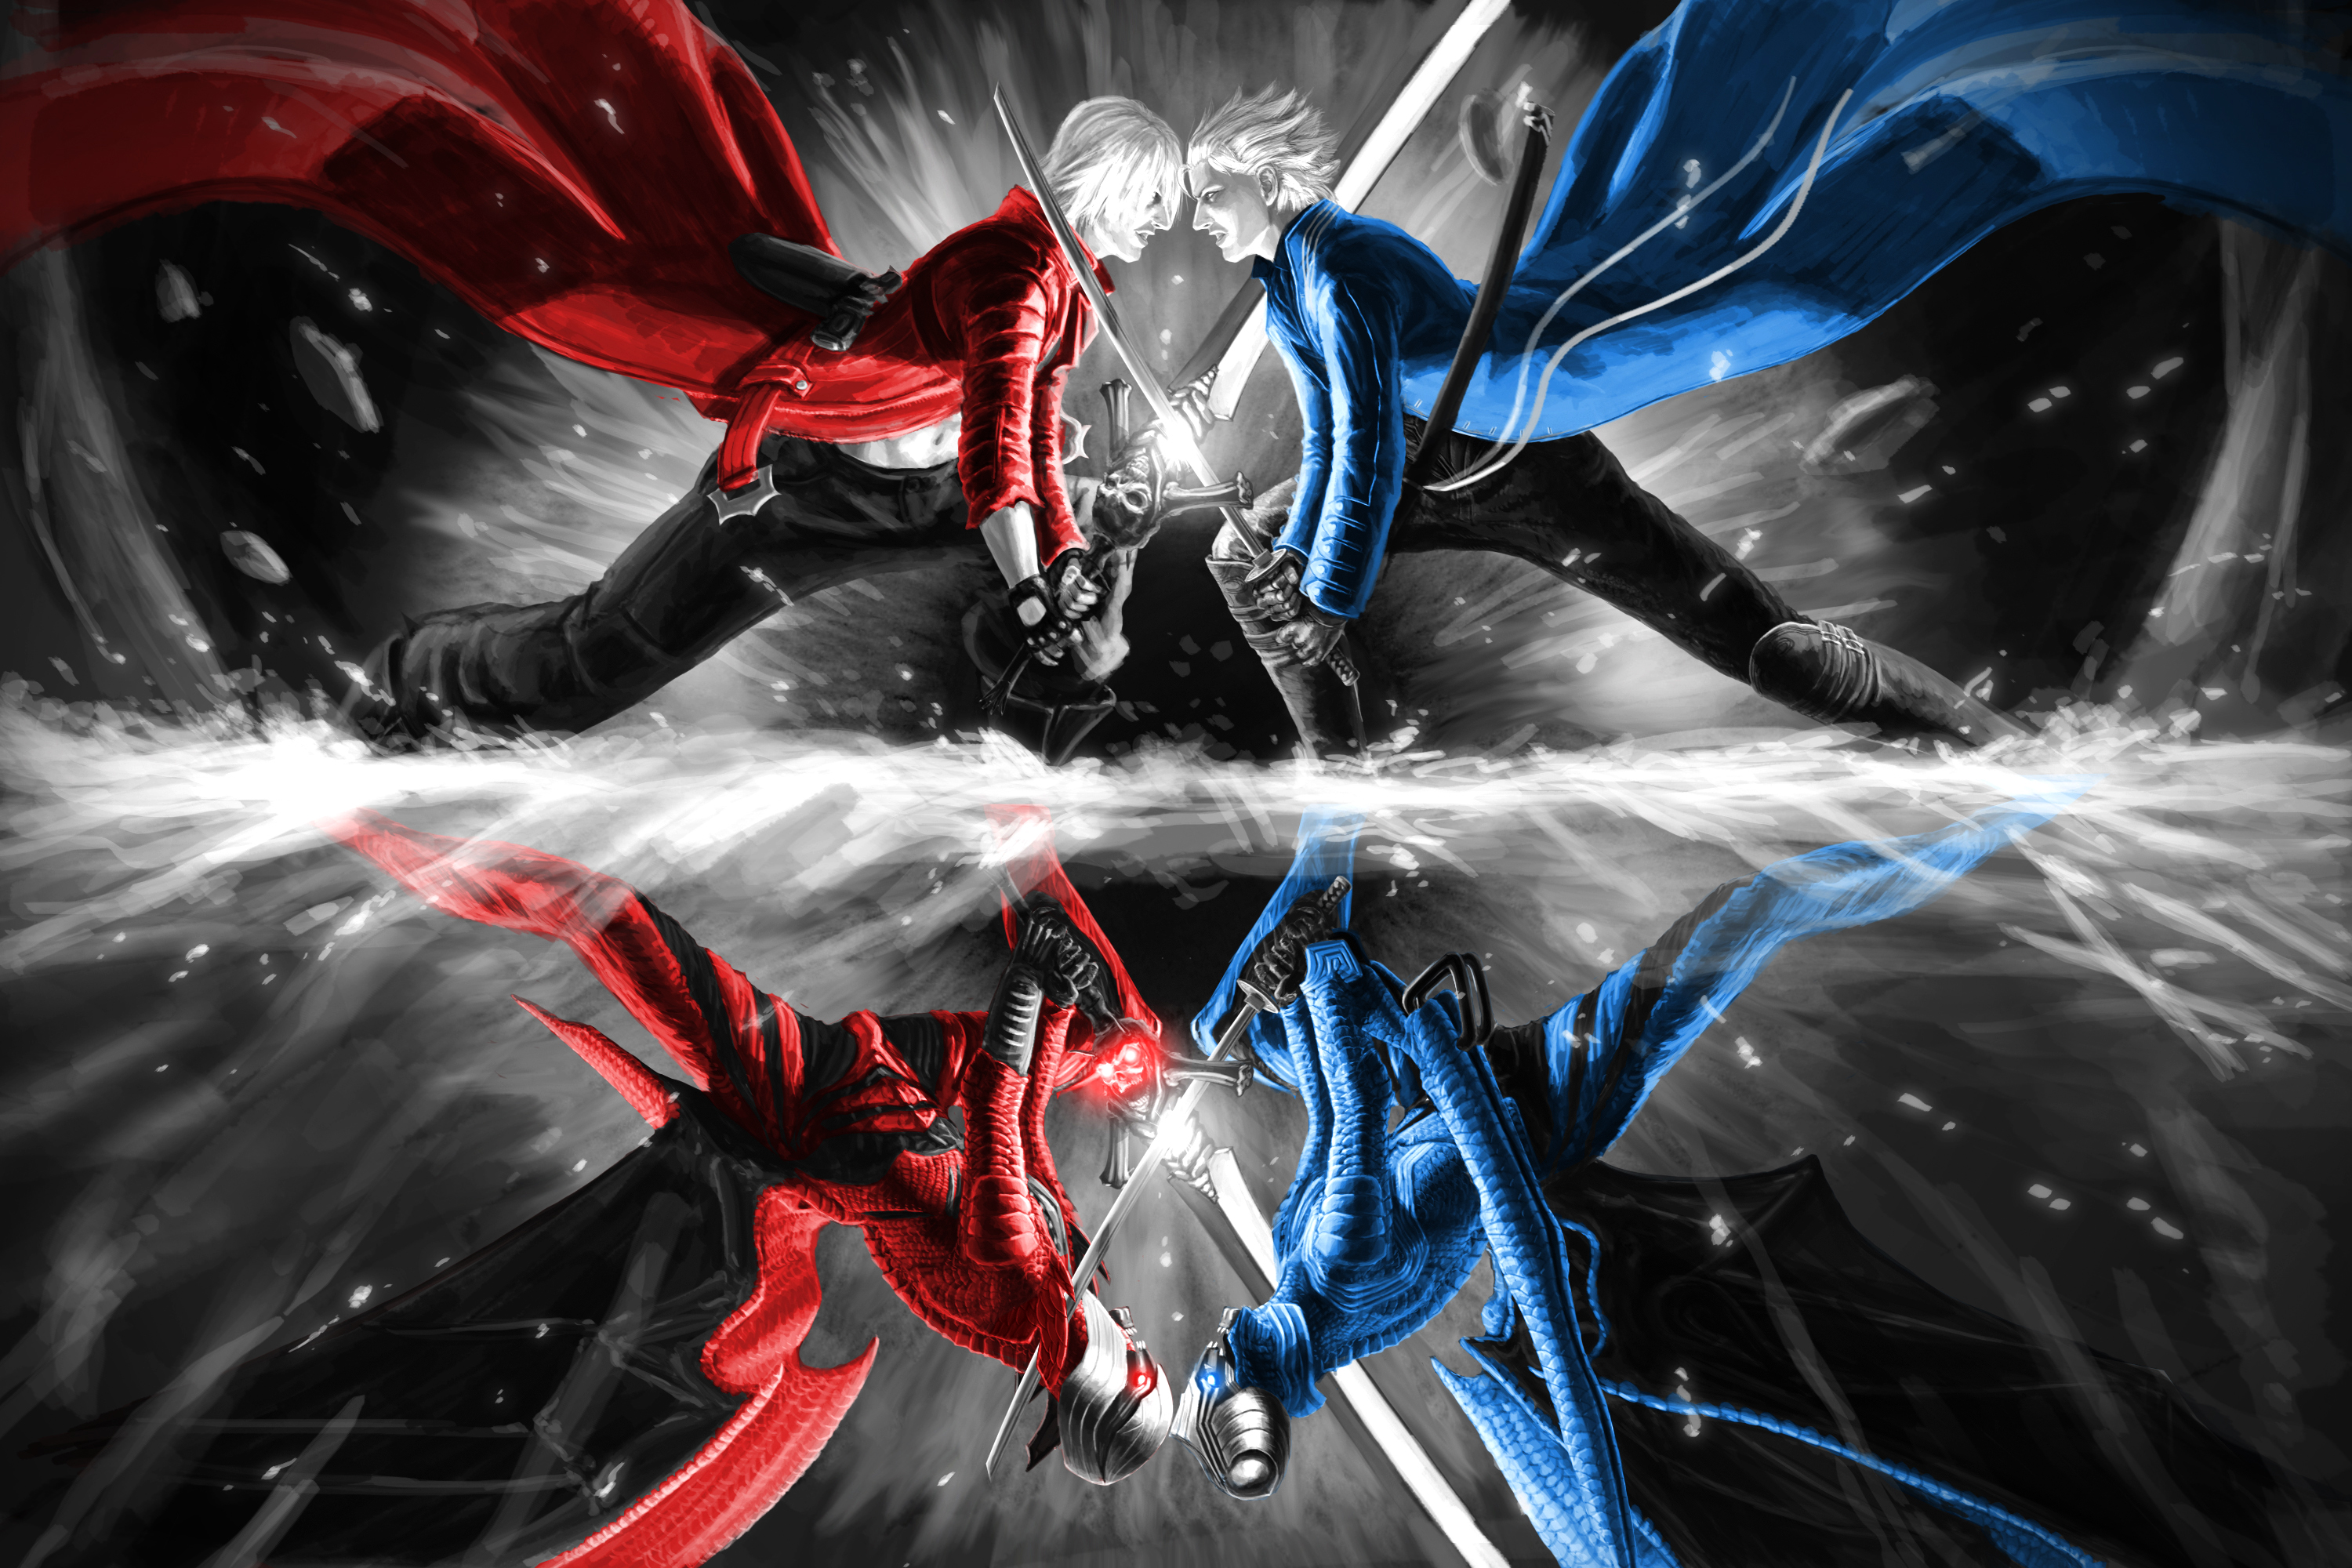 98 Devil May Cry HD Wallpapers Backgrounds - Wallpaper Abyss